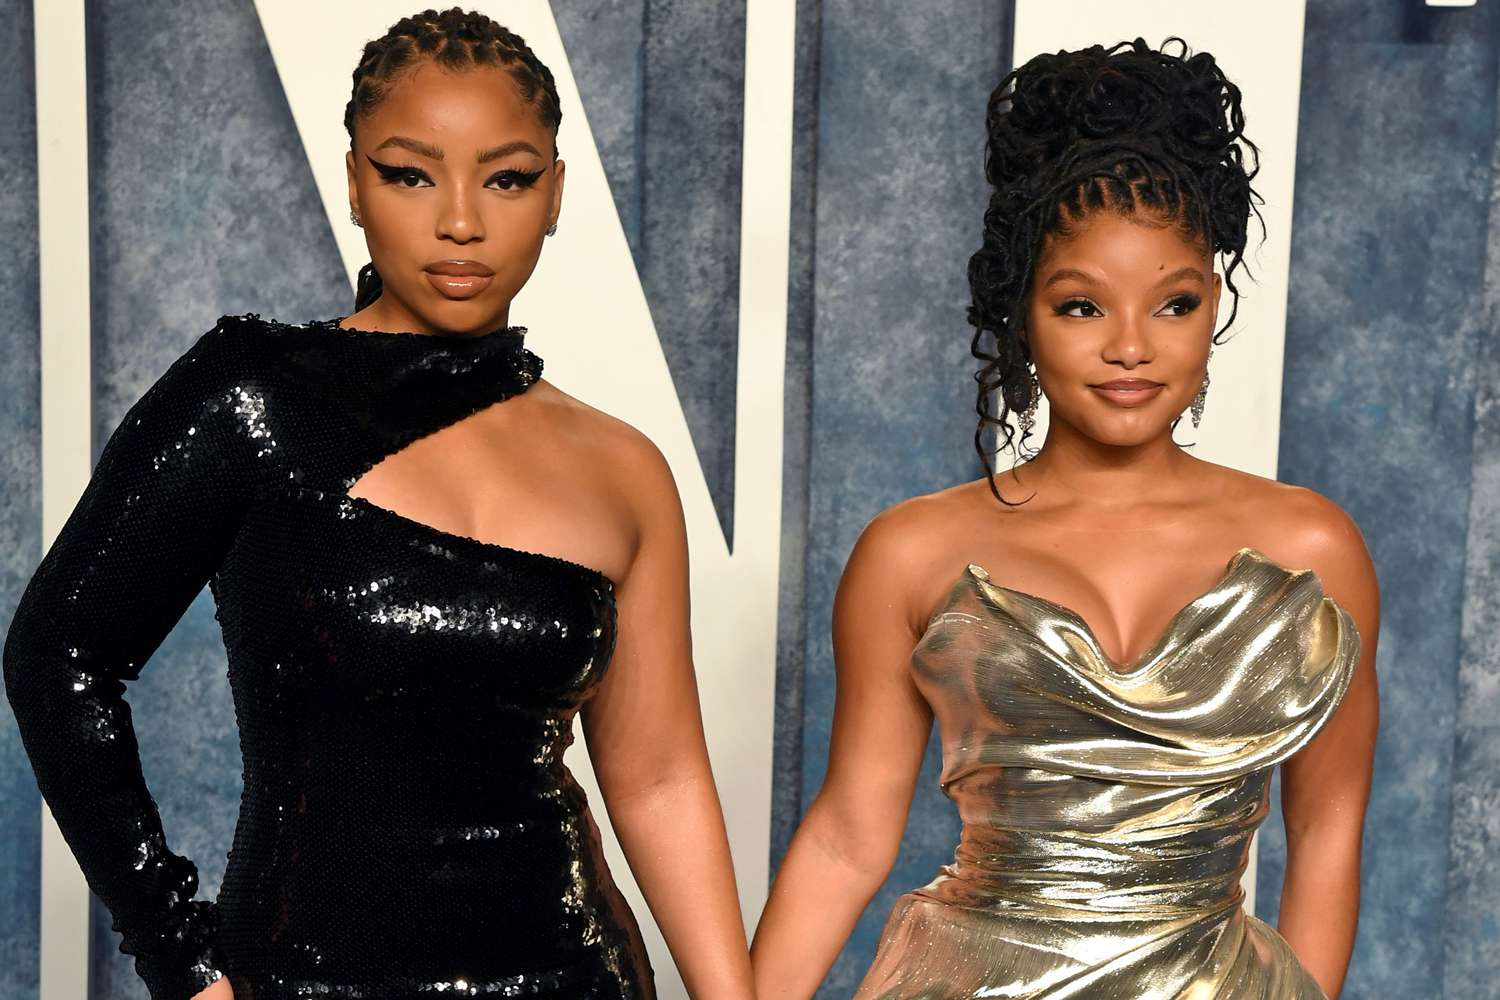 Halle Bailey and Chloe Bailey started there career as the duo Chloe x Halle